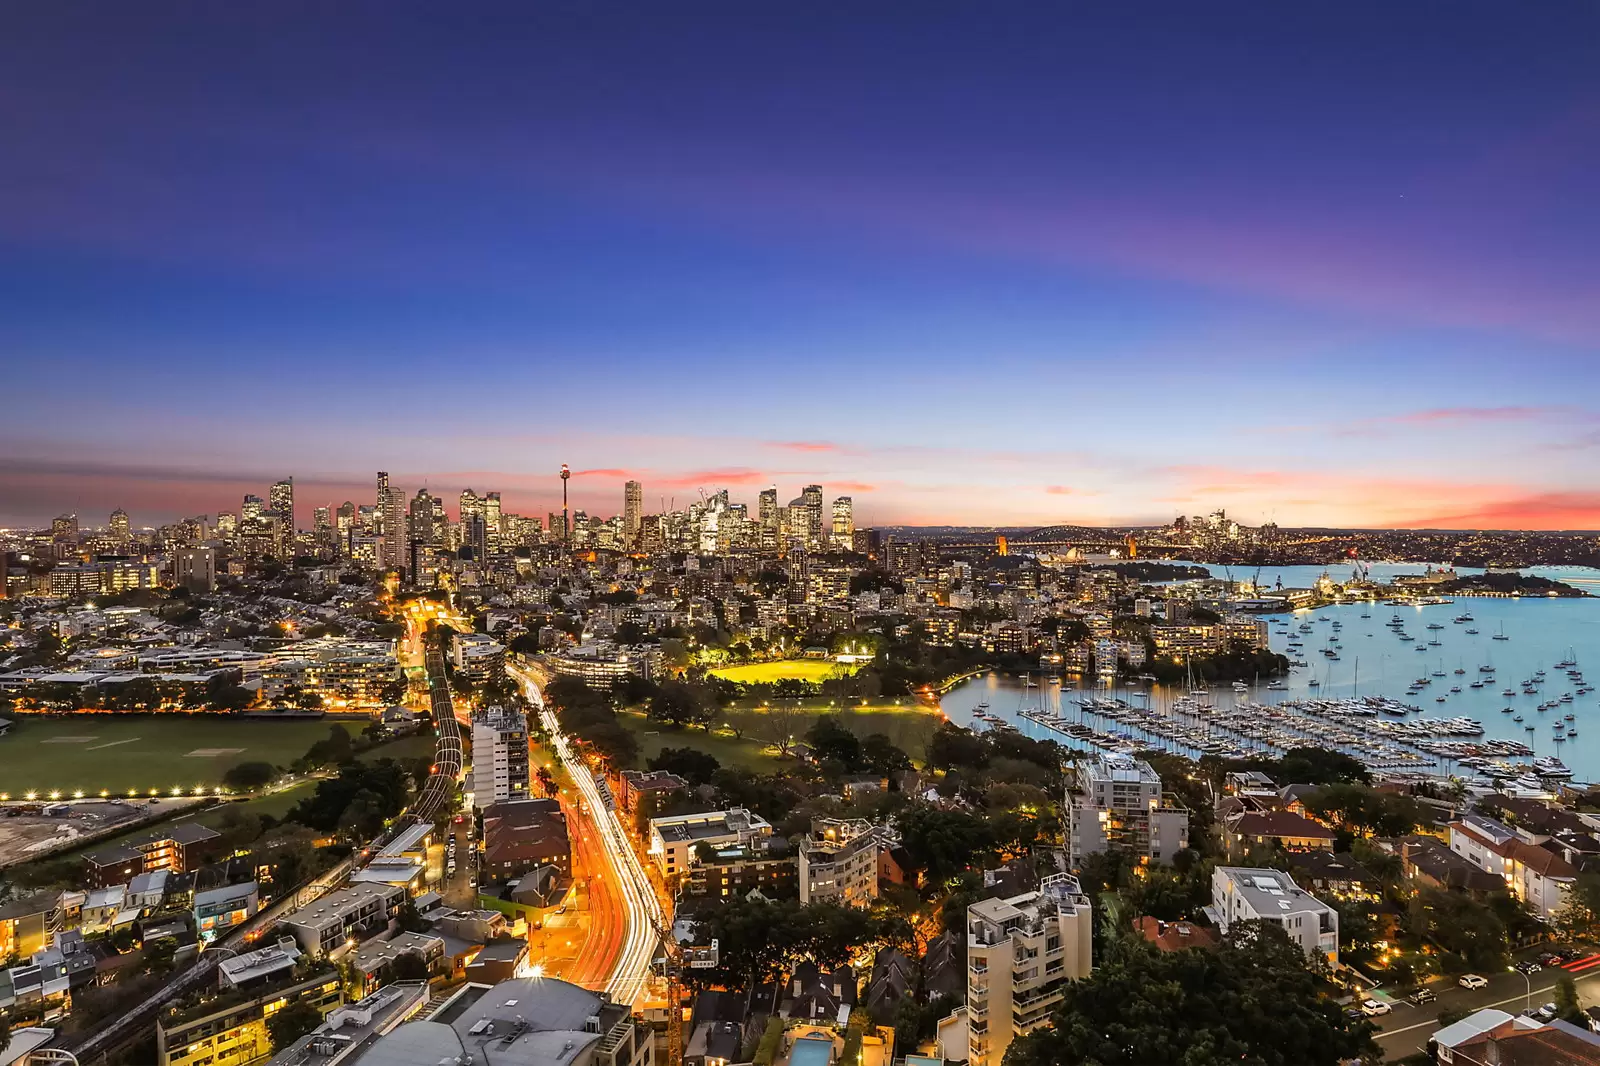 Photo #3: 27B/3 Darling Point Road, Darling Point - Sold by Sydney Sotheby's International Realty